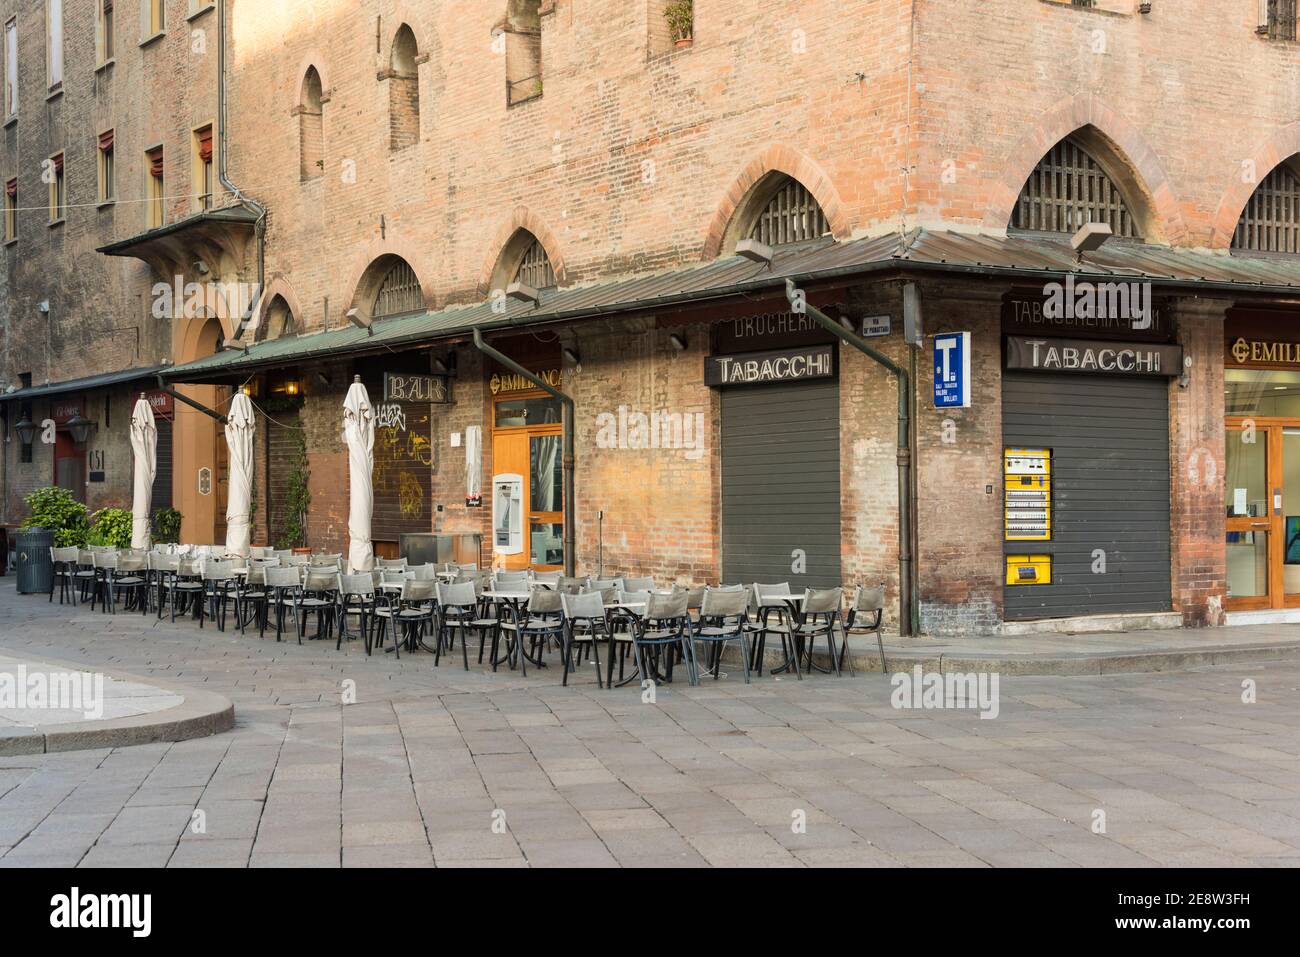 The Emilian Cafe and tobacconist shop in an old buidling on a street corner in Bologna Italy, closed with empty chairs and tables outside. Stock Photo